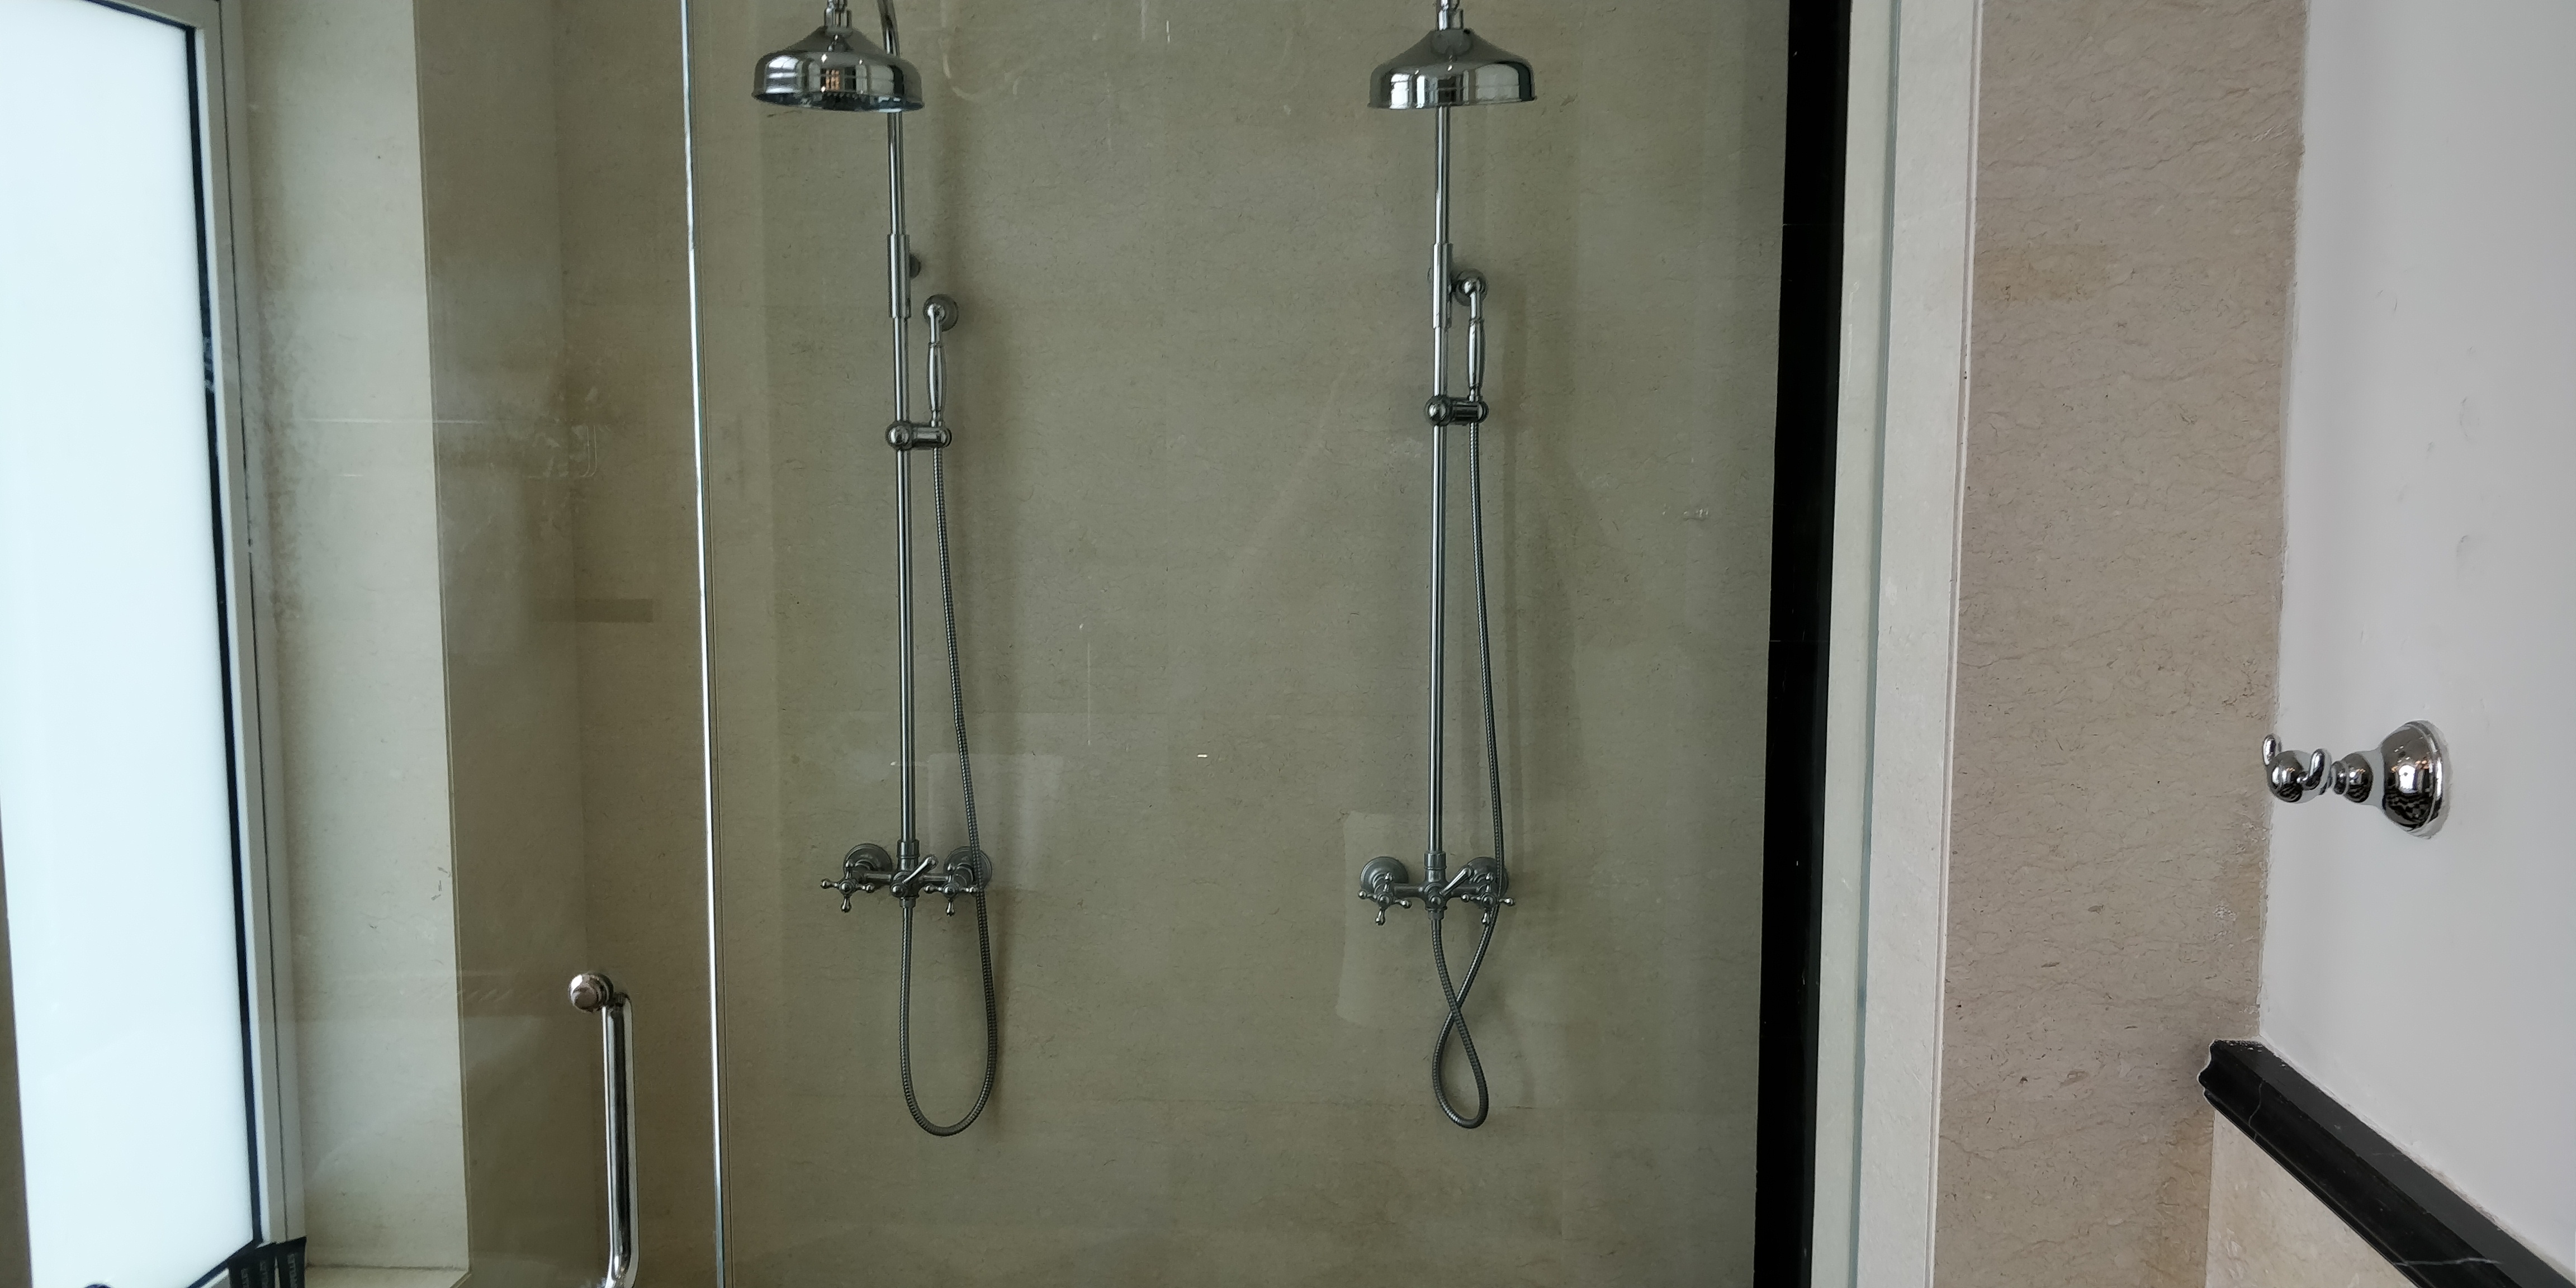 A PICTURE OF THE HIS AND HERS SHOWERS